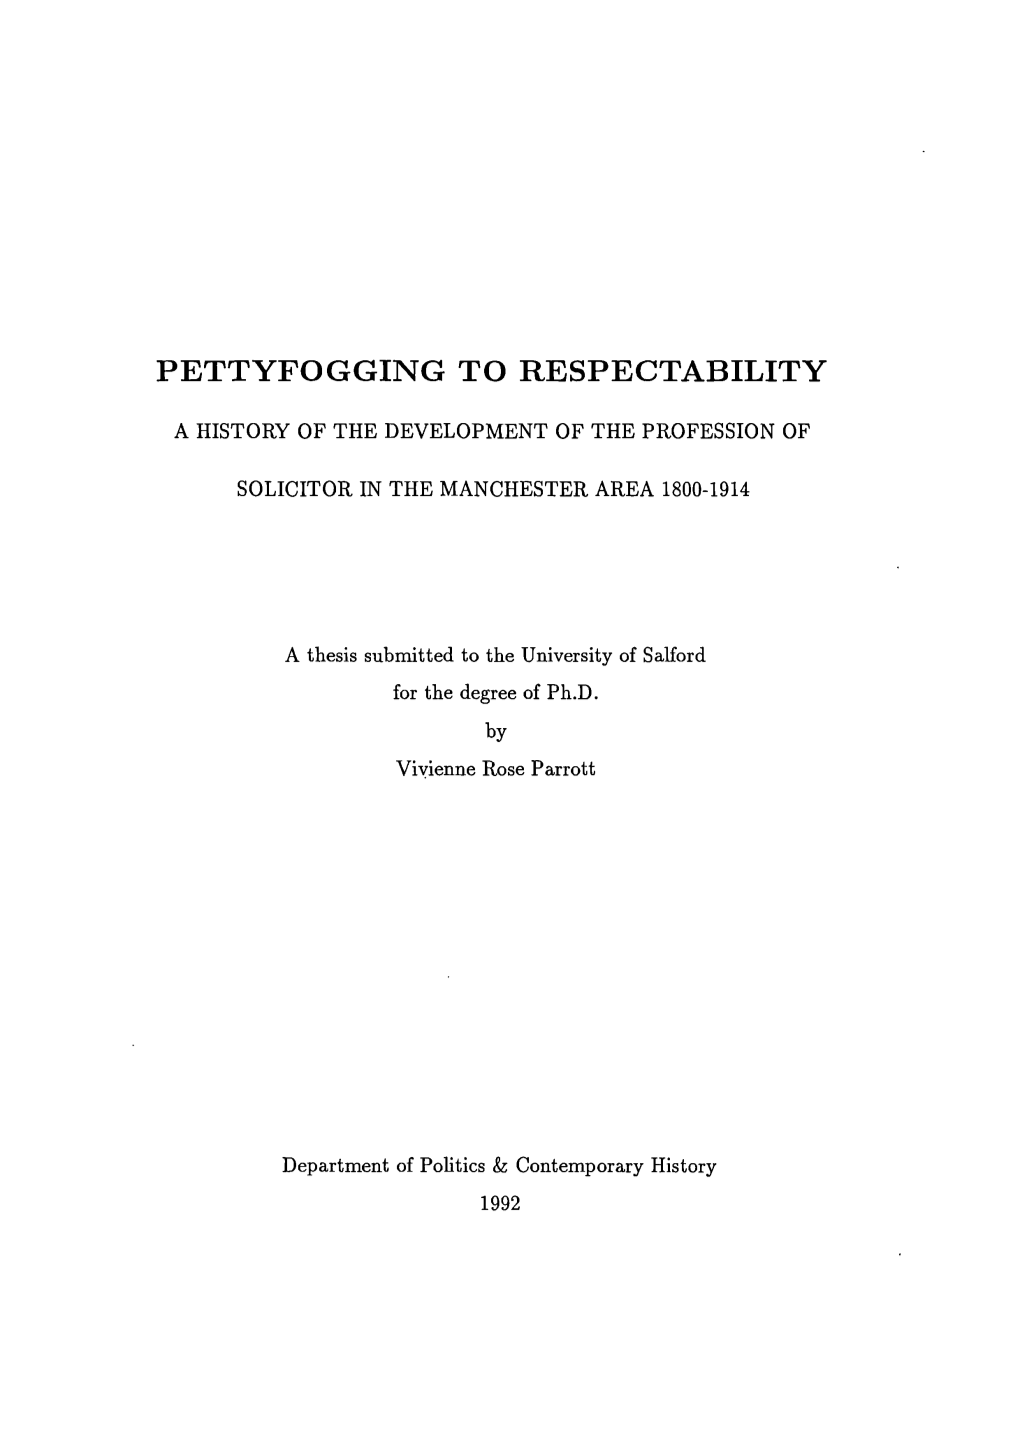 Pettyfogging to Respectability